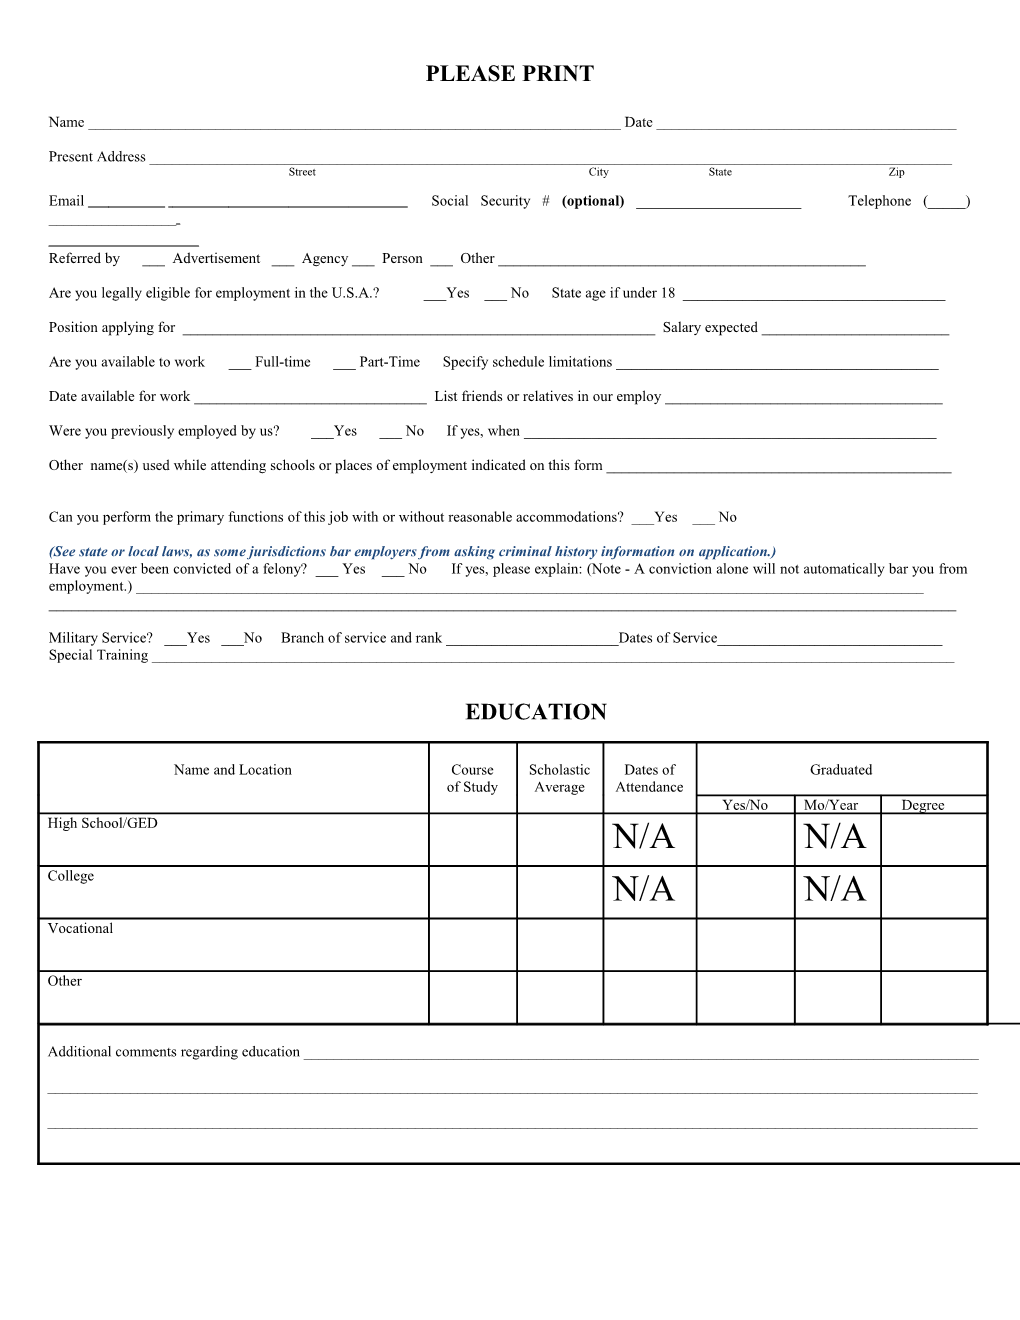 US Sample Employment Application (Includes Criminal History Question)